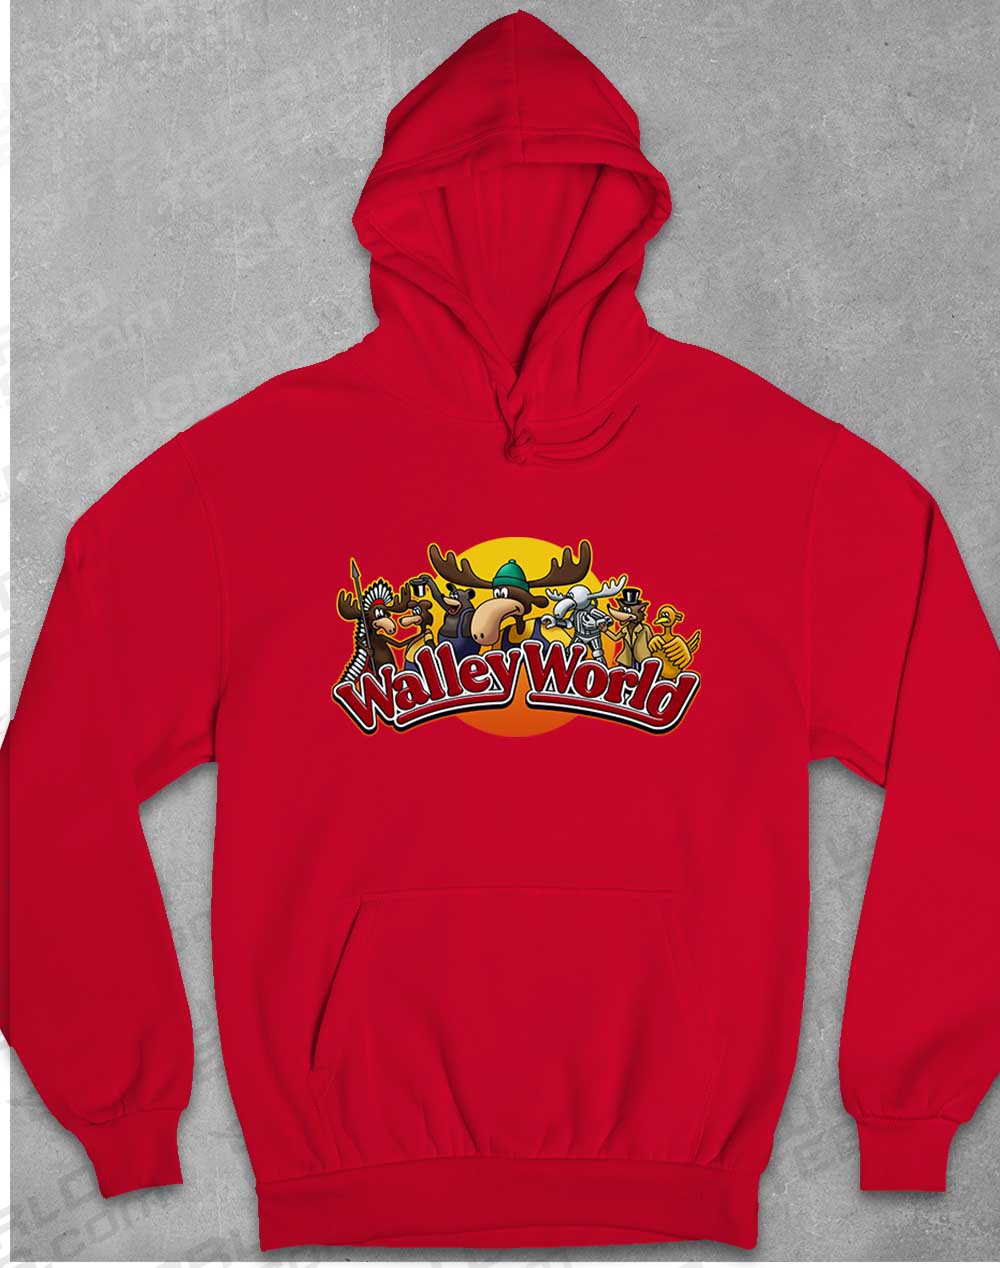 Fire Red - Walley World Hoodie